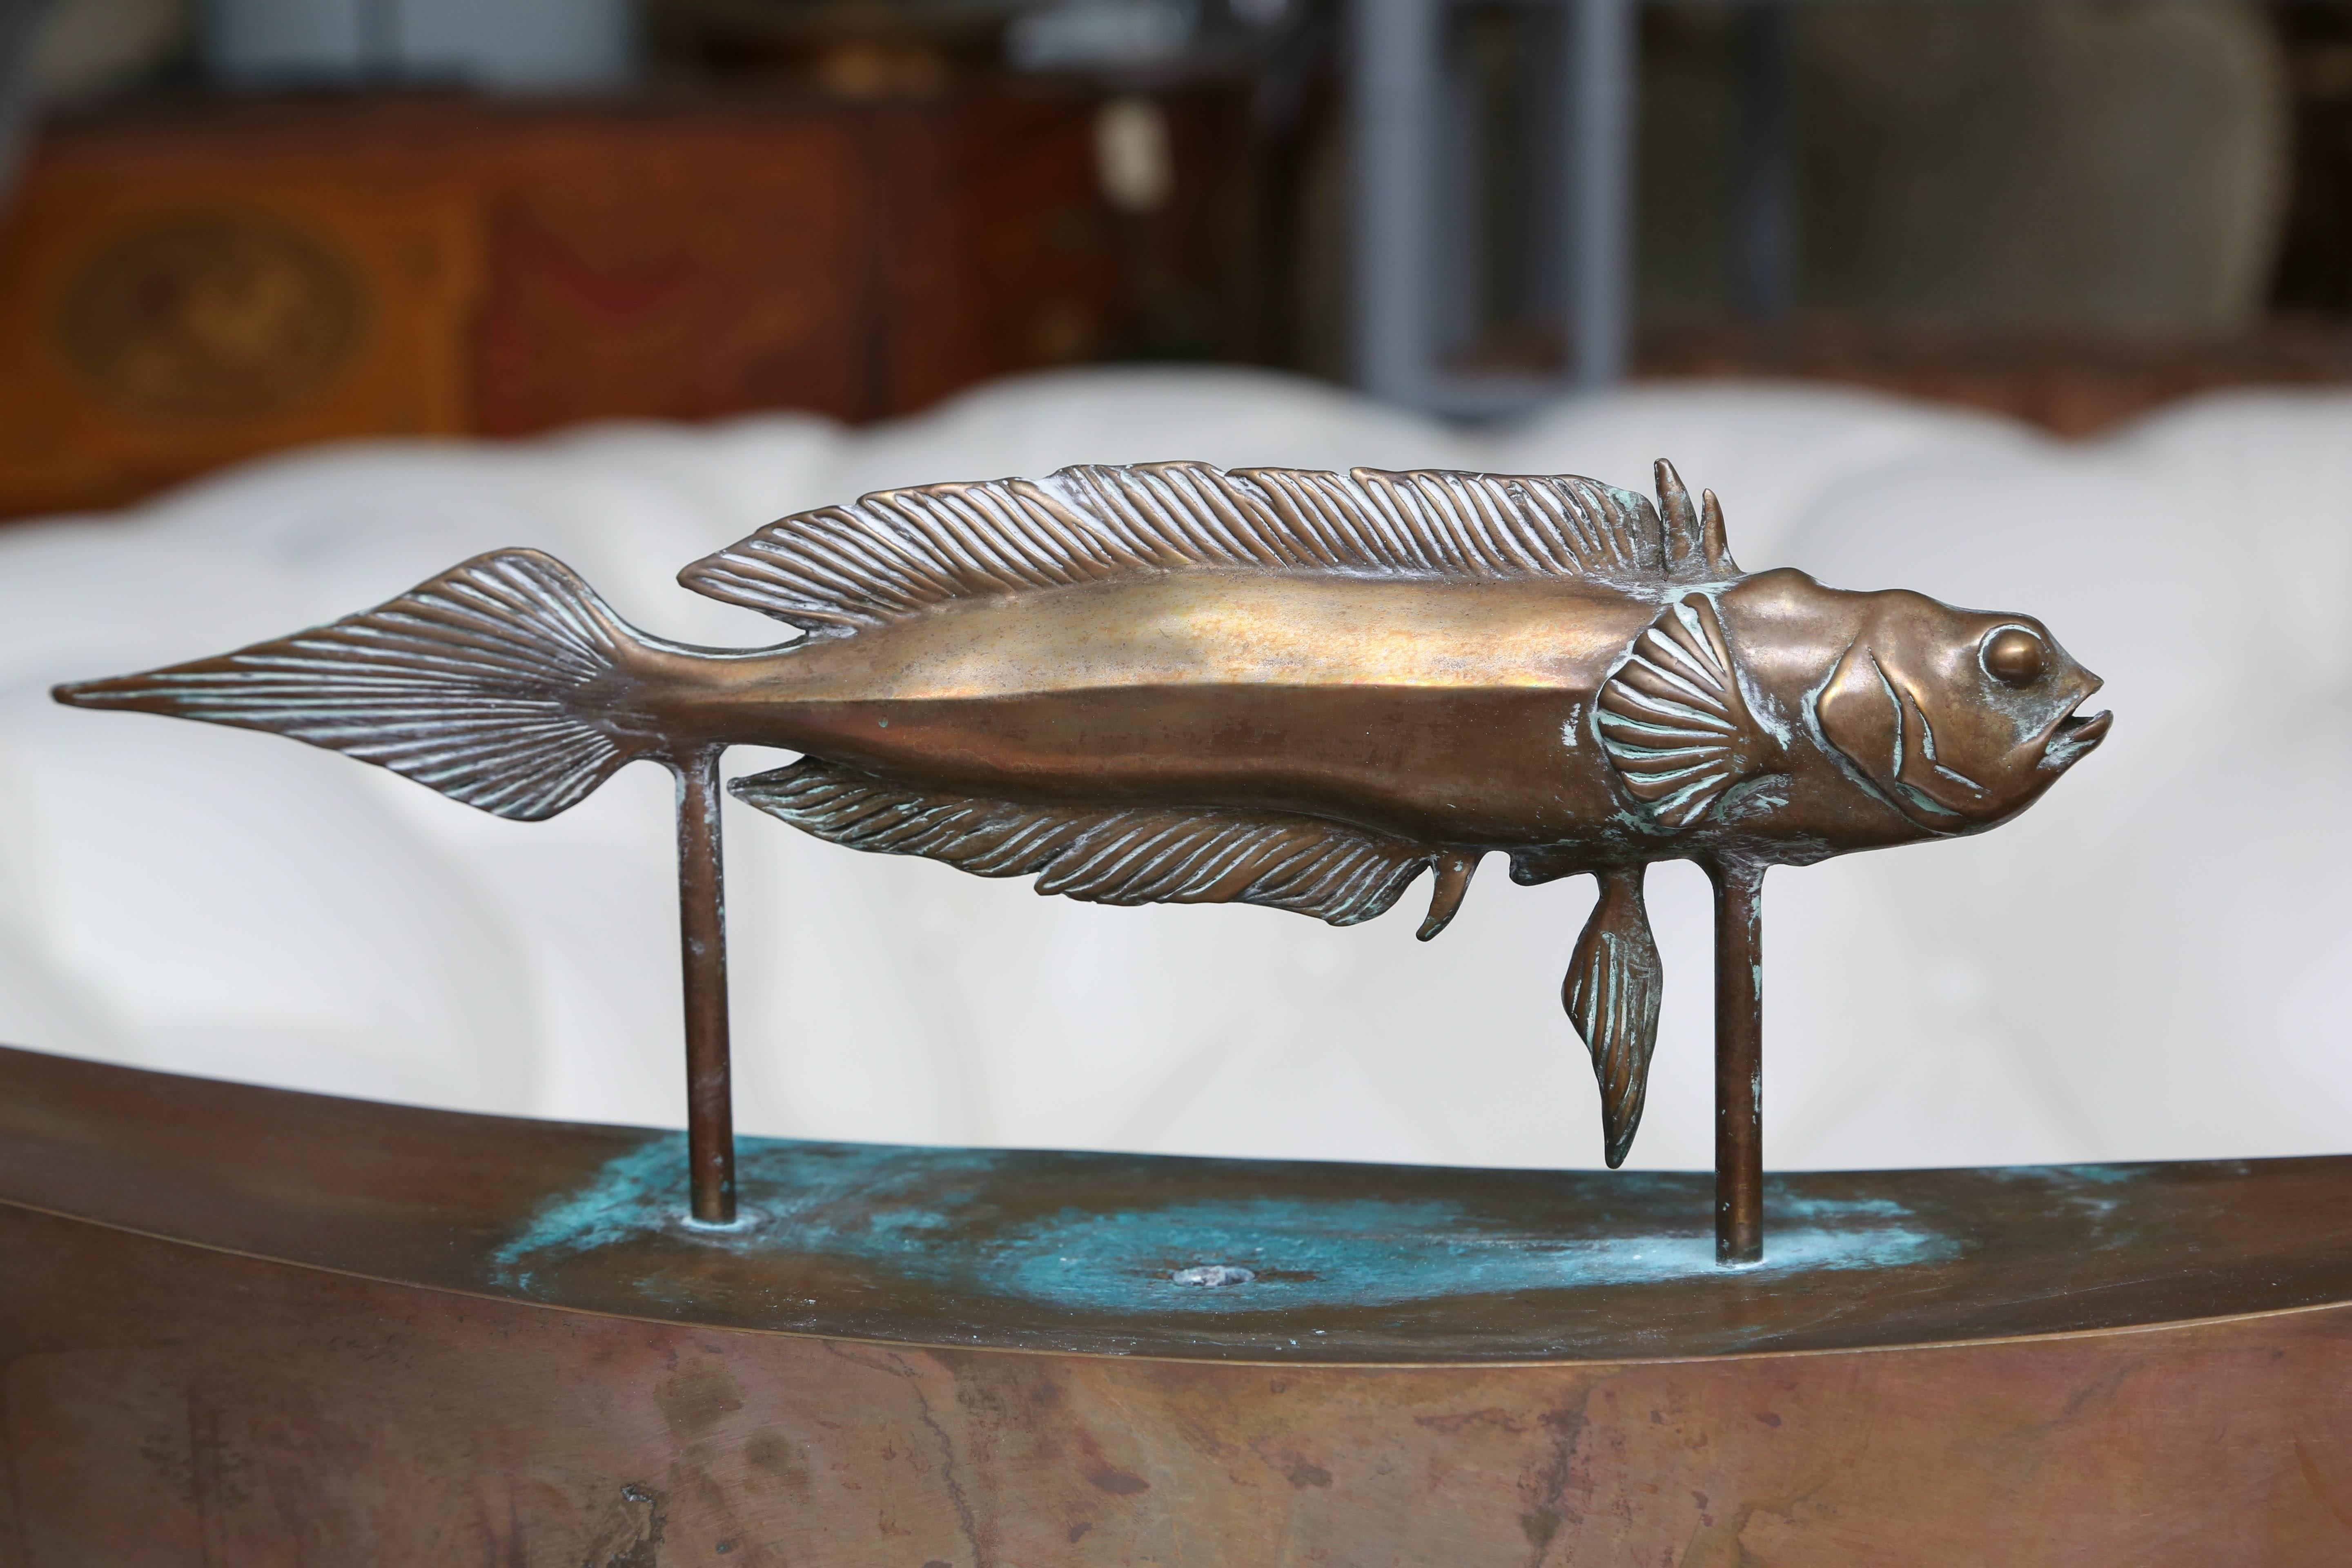 Excellent detailed figure of a fish - unusual form. A rather unique tabletop variety.
The "arc" fits into the heavy base which holds the water.